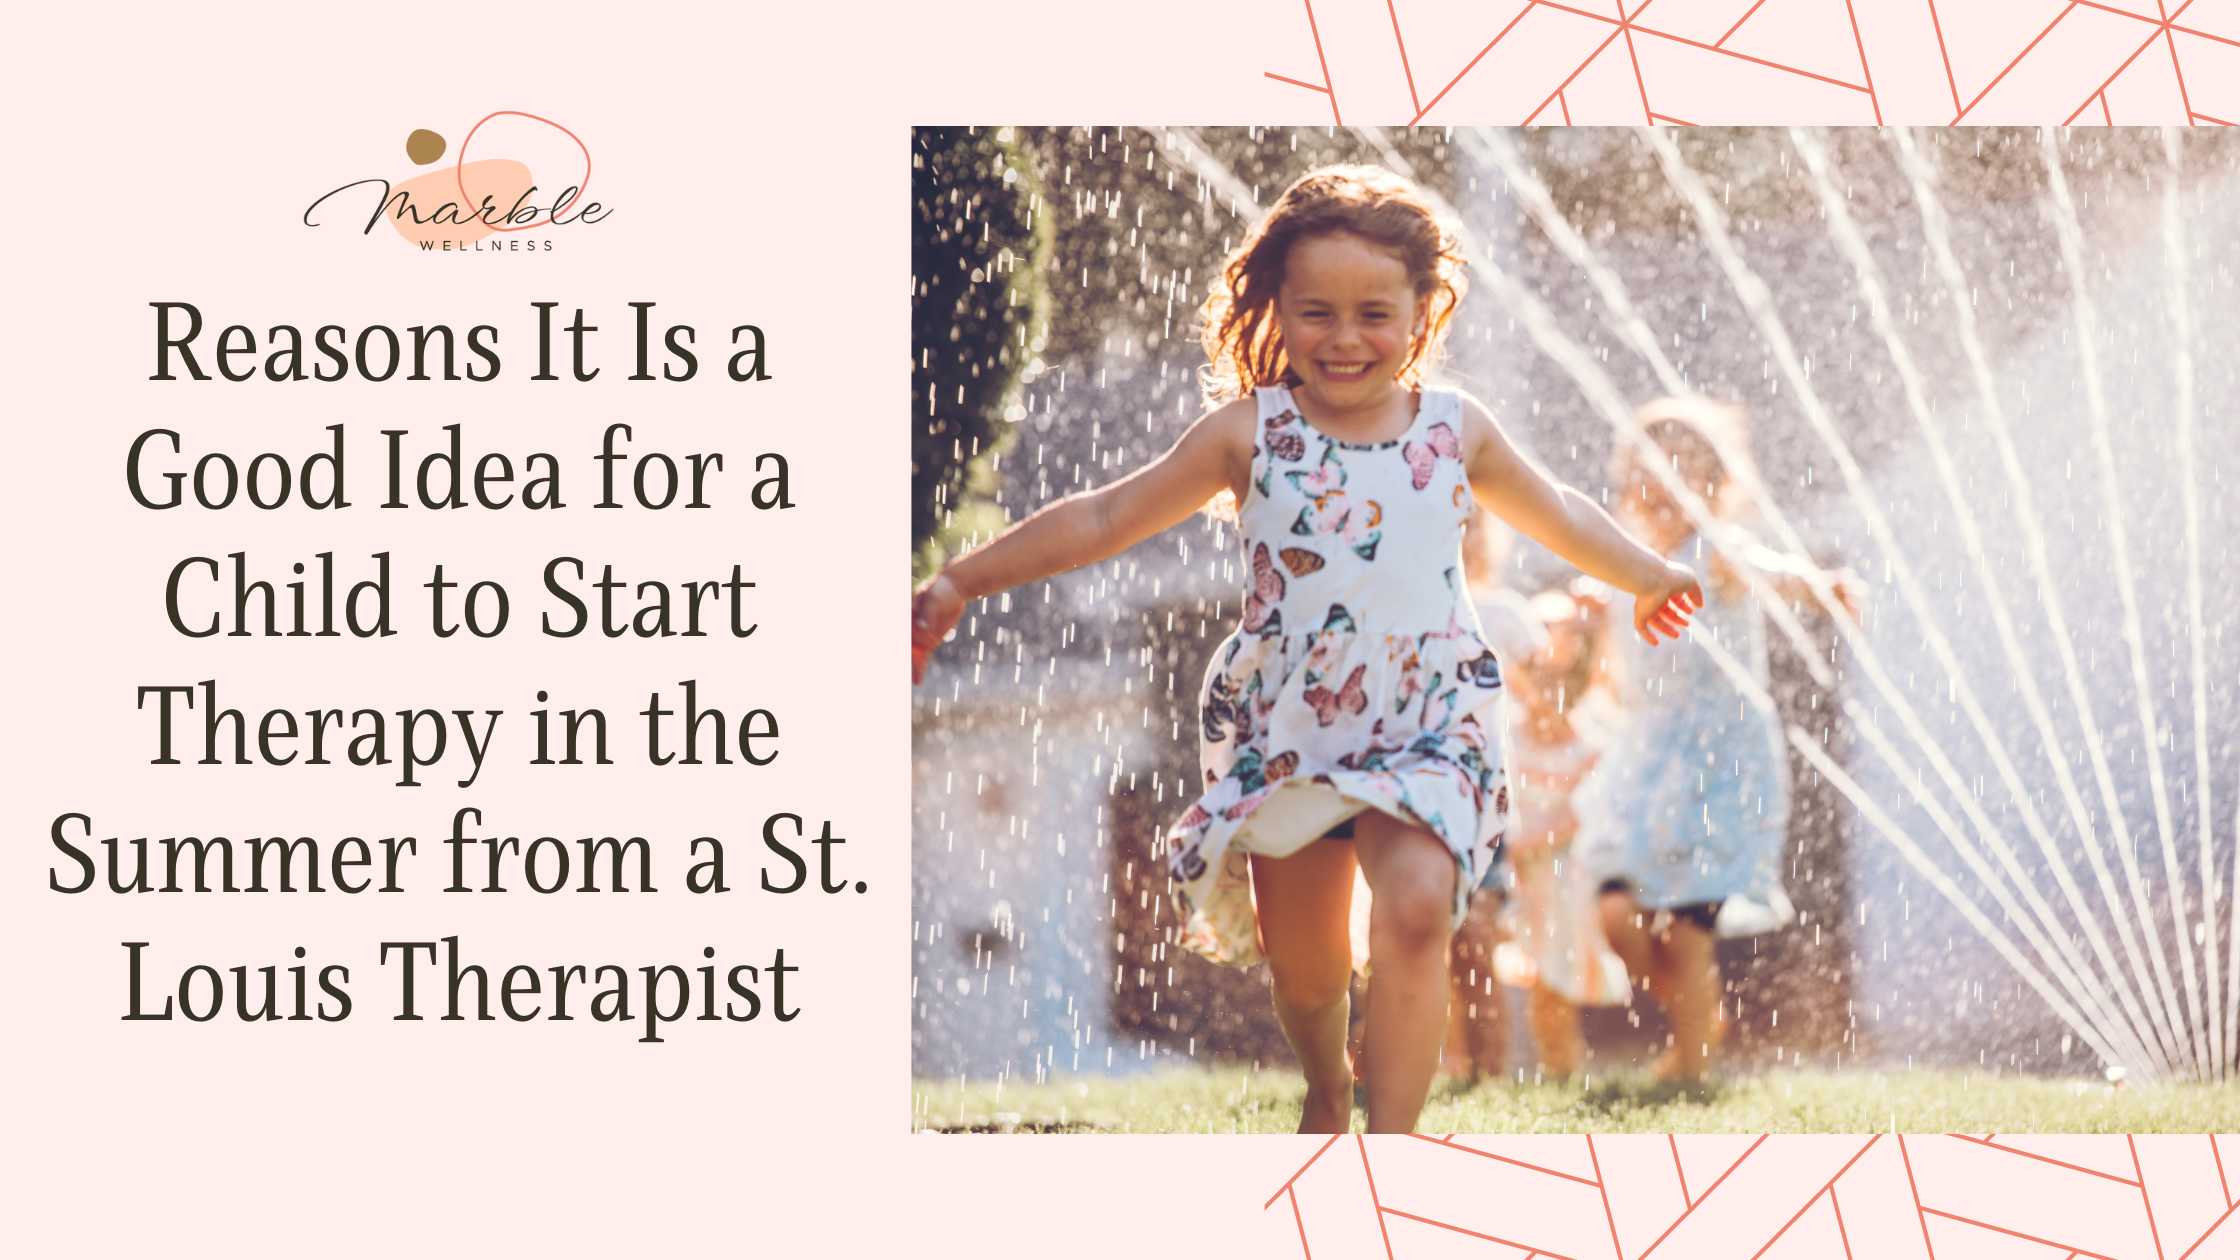 Child running happily and having fun. This represents how summer is a fantastic time for you child to start therapy and prepare for a happier and smoother school year.